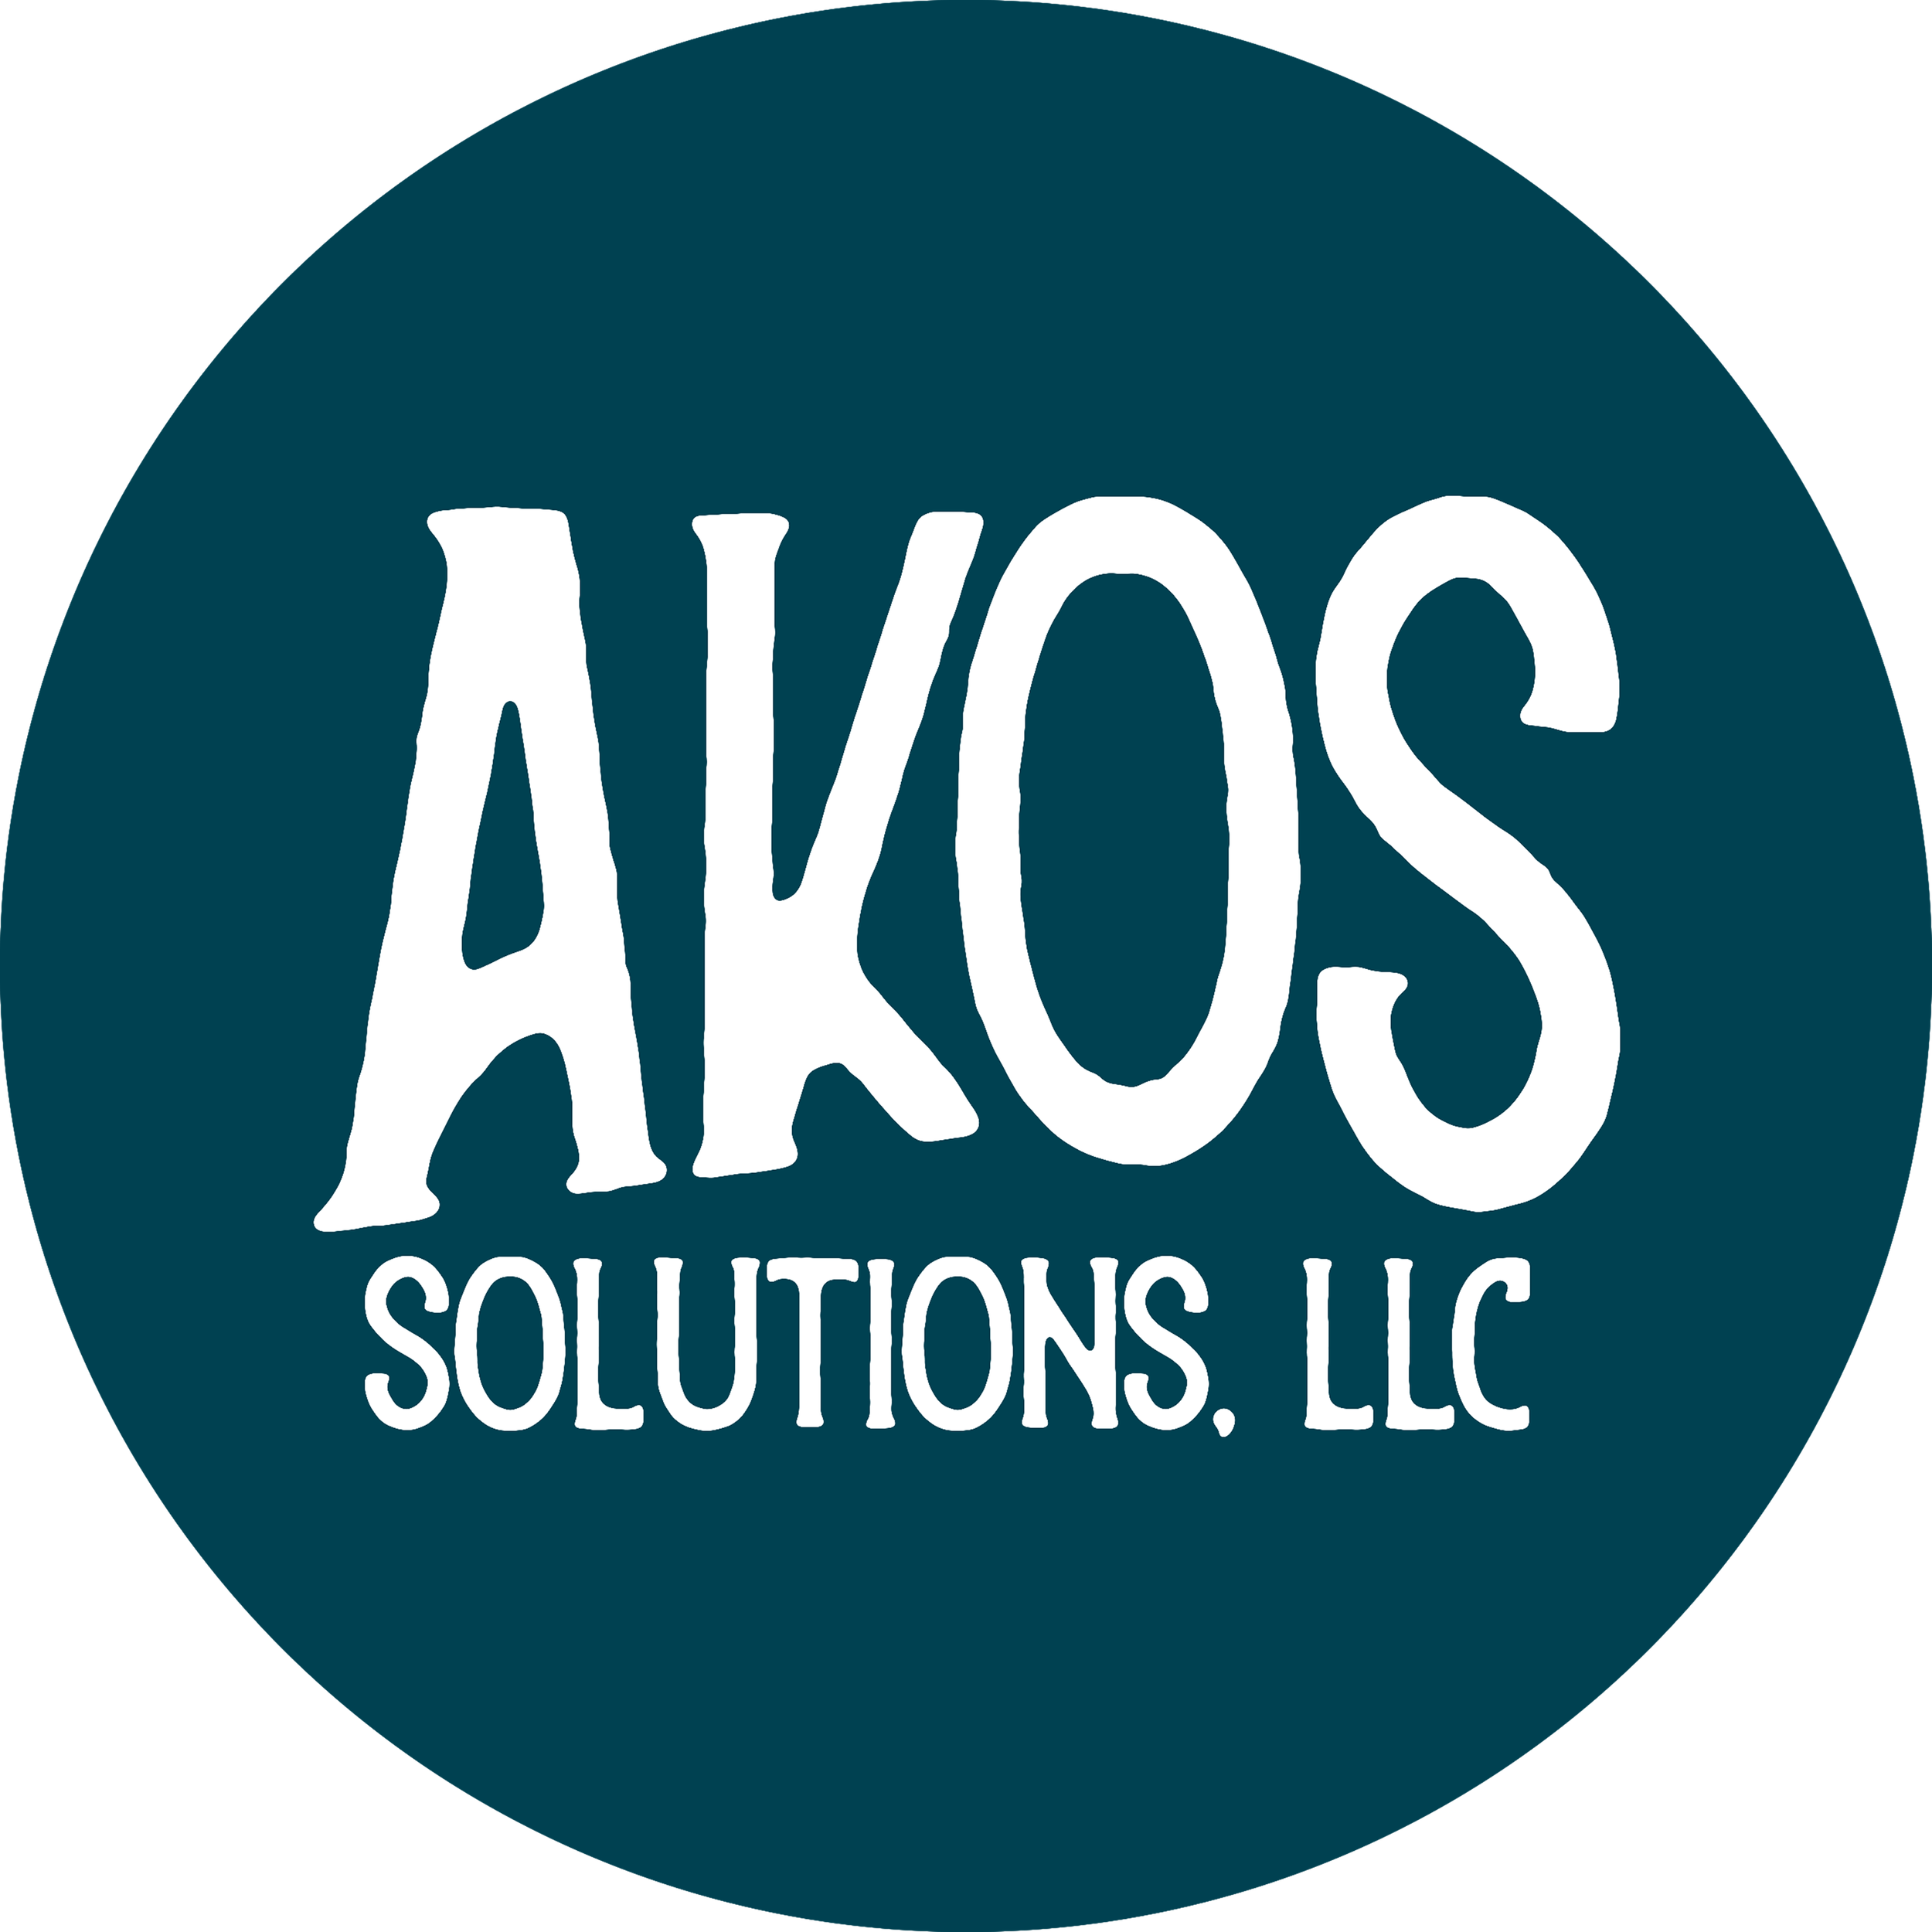 AKOS Solutions, LLC Insurance and More